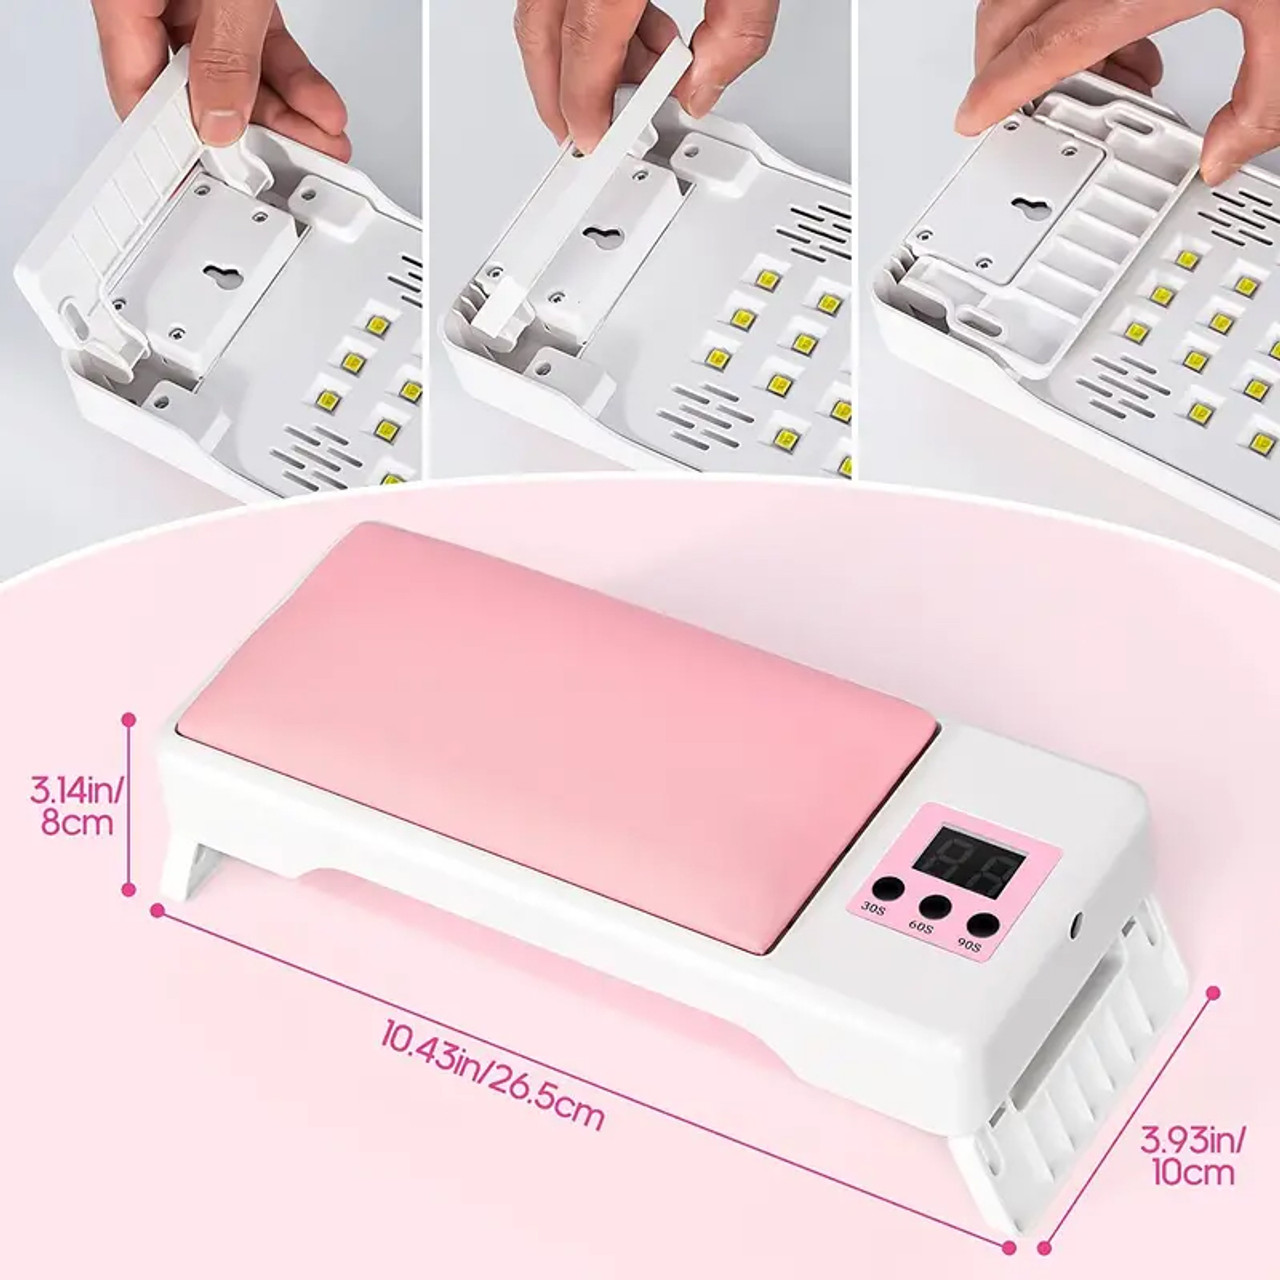 Uv Light For Nails With 72 Lamp Beads, Uv Led Nail Lamp